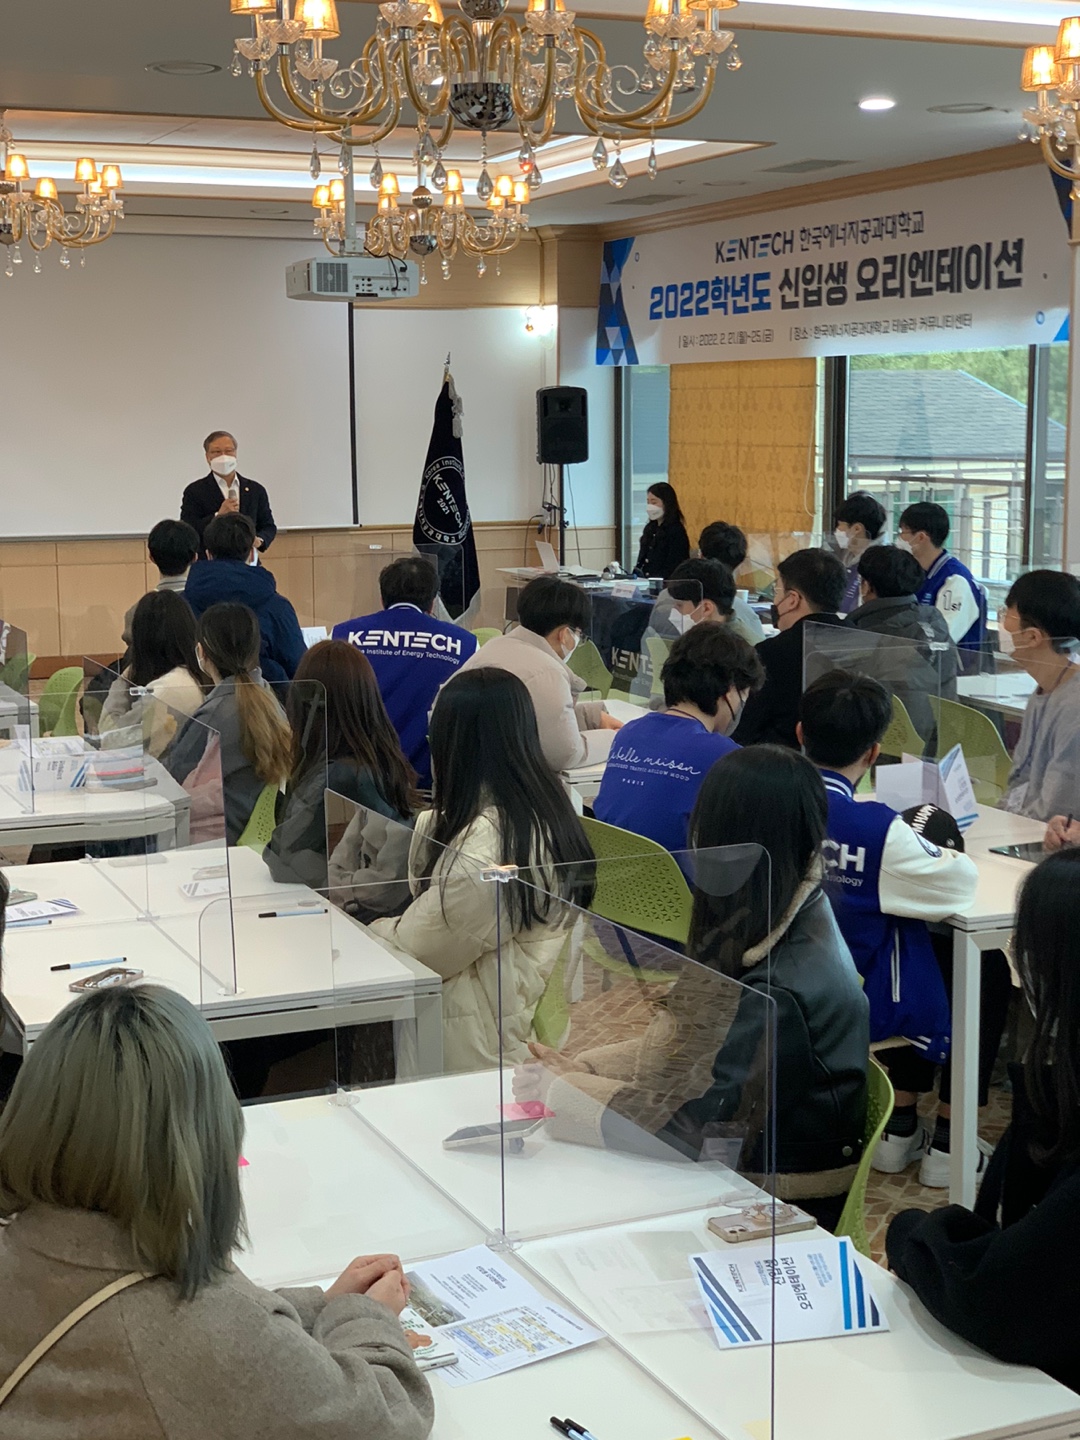 2022 Student Orientation at Korea Institute of Energy Technology 